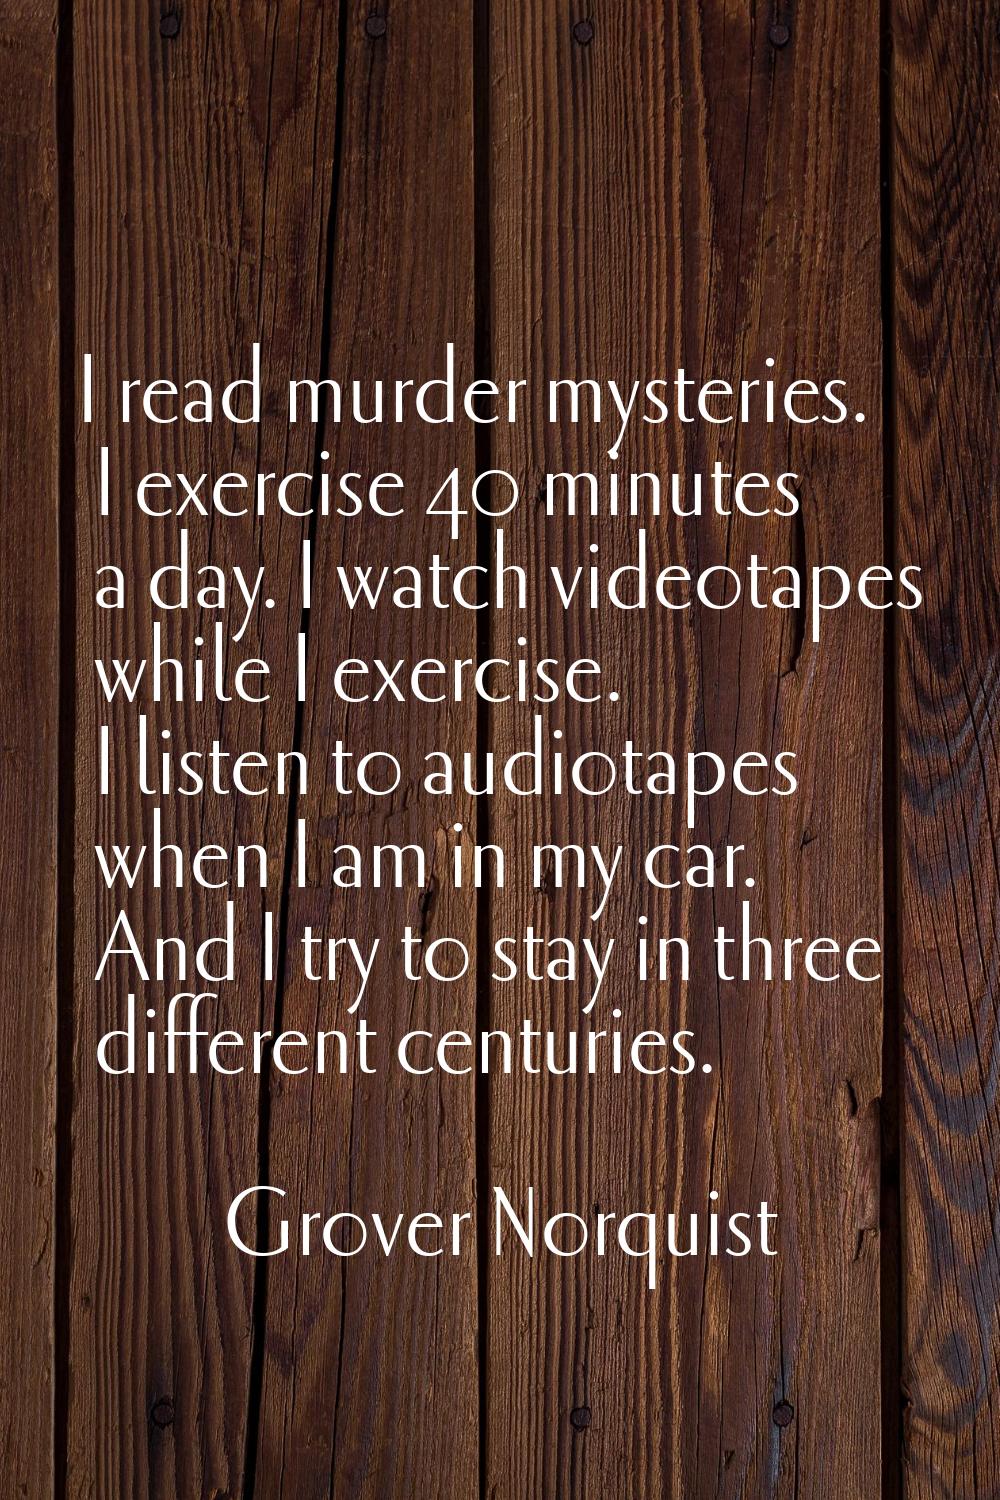 I read murder mysteries. I exercise 40 minutes a day. I watch videotapes while I exercise. I listen